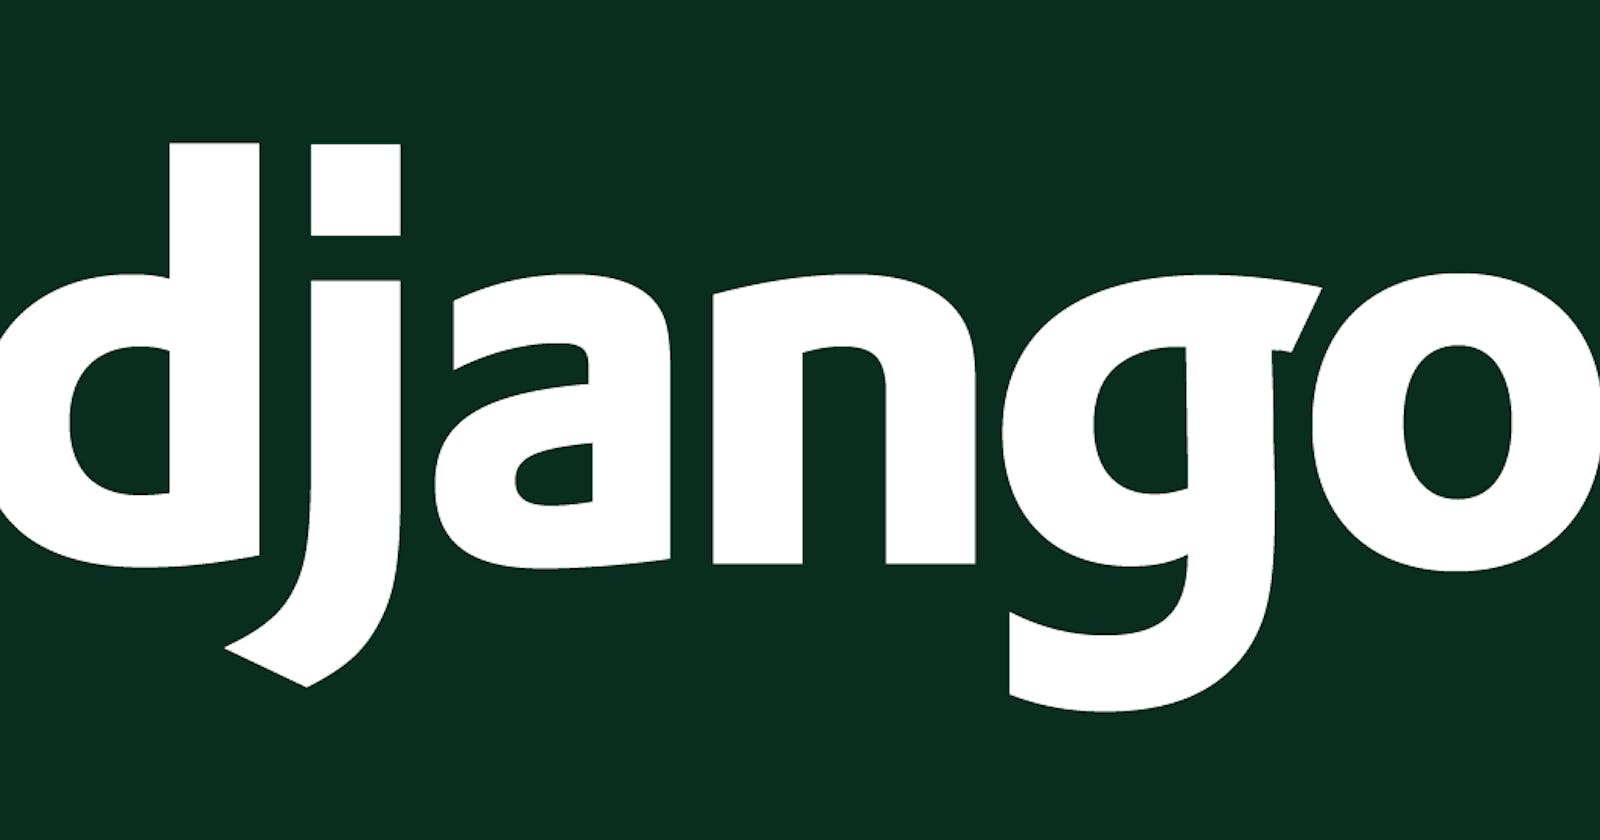 Getting Started with Django (Part 1)